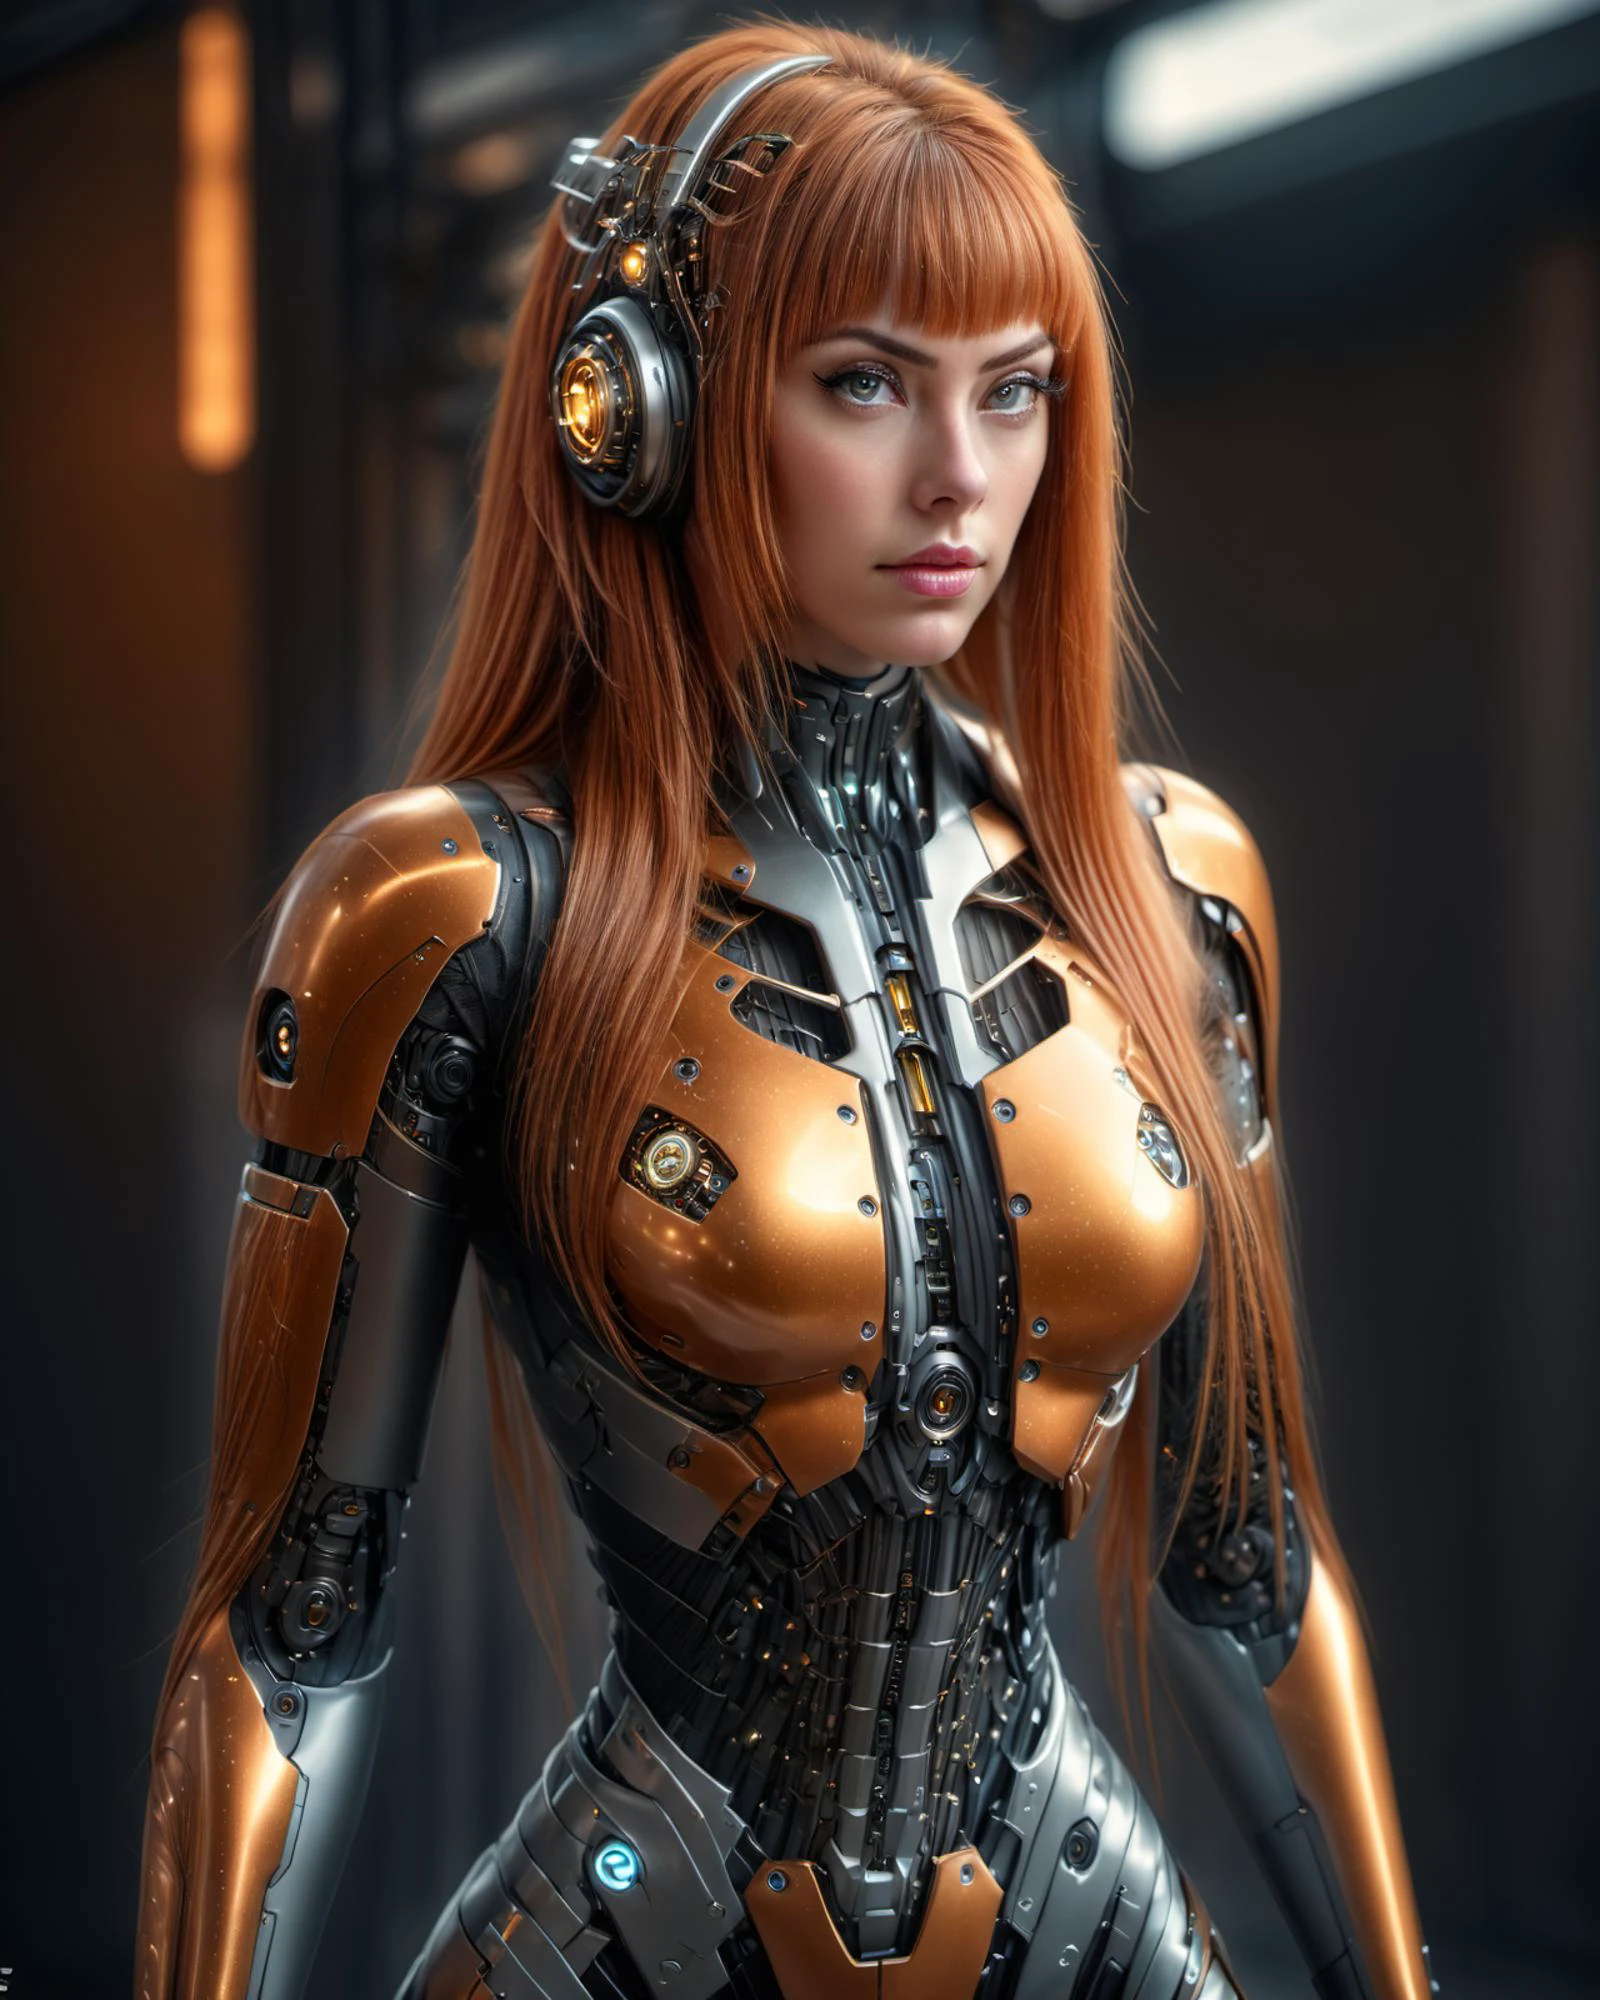 (detailed face), (photorealistic), (masterpiece), (photography), (realistic skin texture), alluring woman
sexy  1girl, , ginger,  (very long hair with bang), paddock girl,, looking at viewer, (cleavage), , (front view), narrow waist   futuristic suit cyborg style, cyborg, android, blurry background, blurred back DonMCyb3rN3cr0XL , techno-witch, cyborg, occultist space_Girl